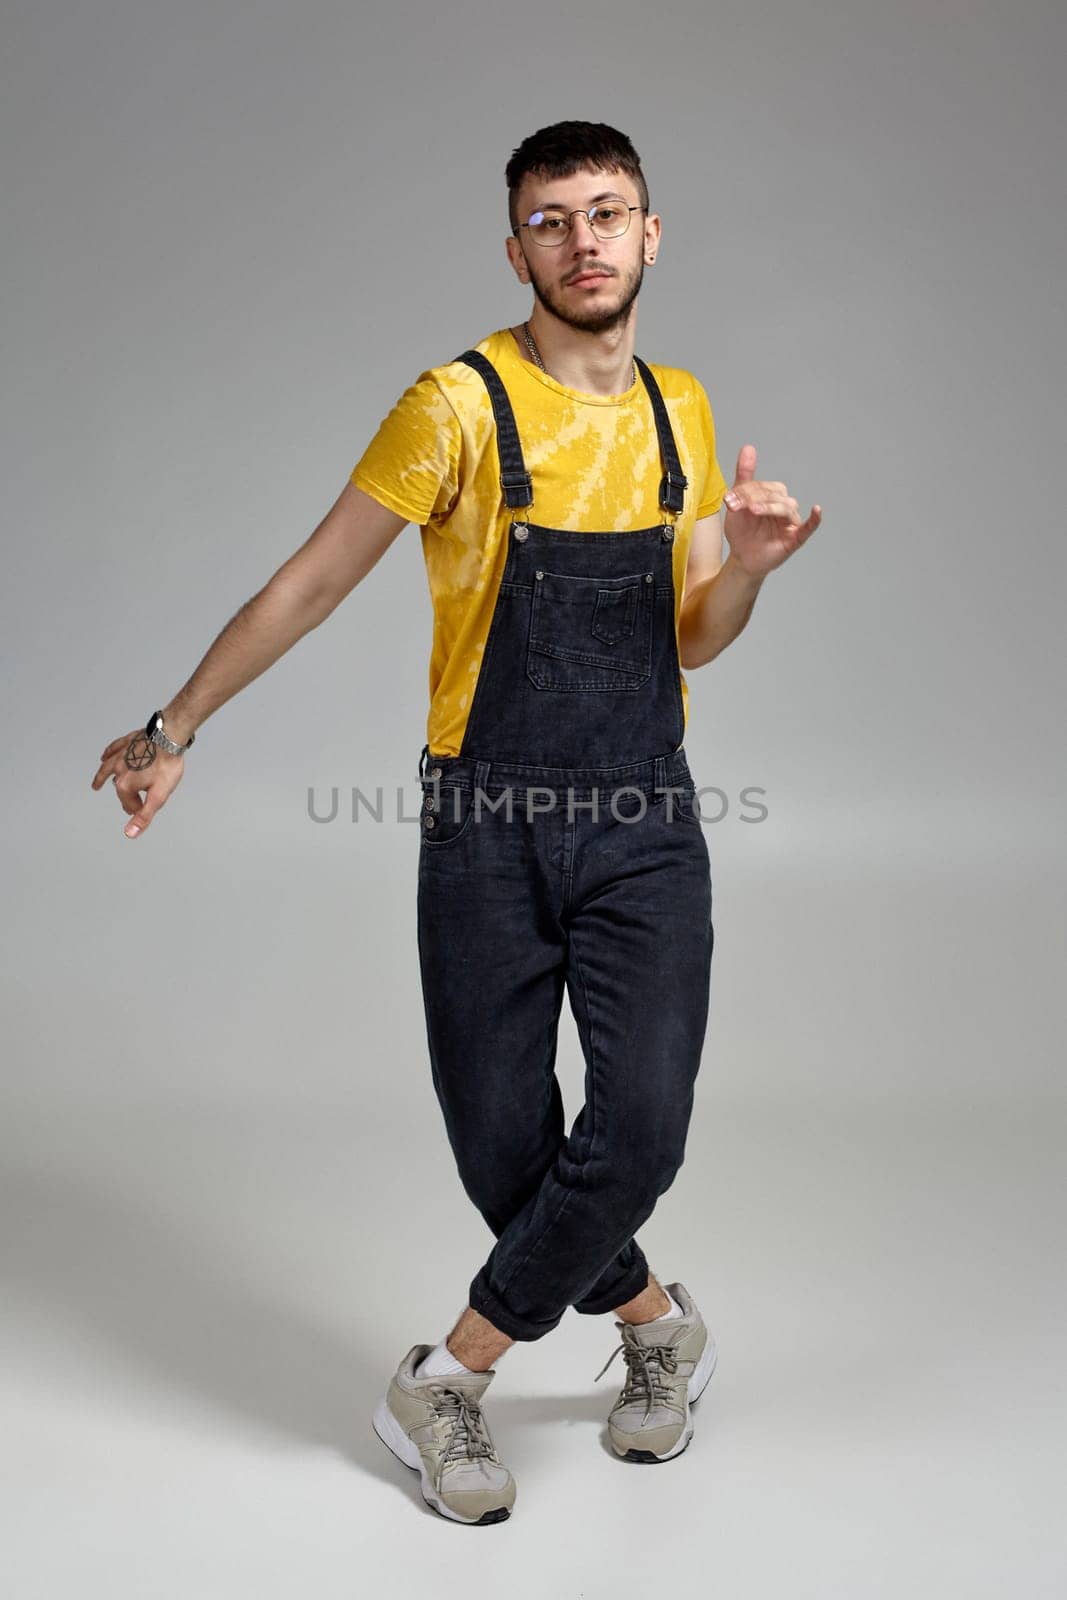 Full-length portrait of a stylish man in glasses, black jumpsuit, yellow t-shirt and gray sneakers fooling around in studio. Indoor photo of a man dancing on a gray background. Music and imagination concept.